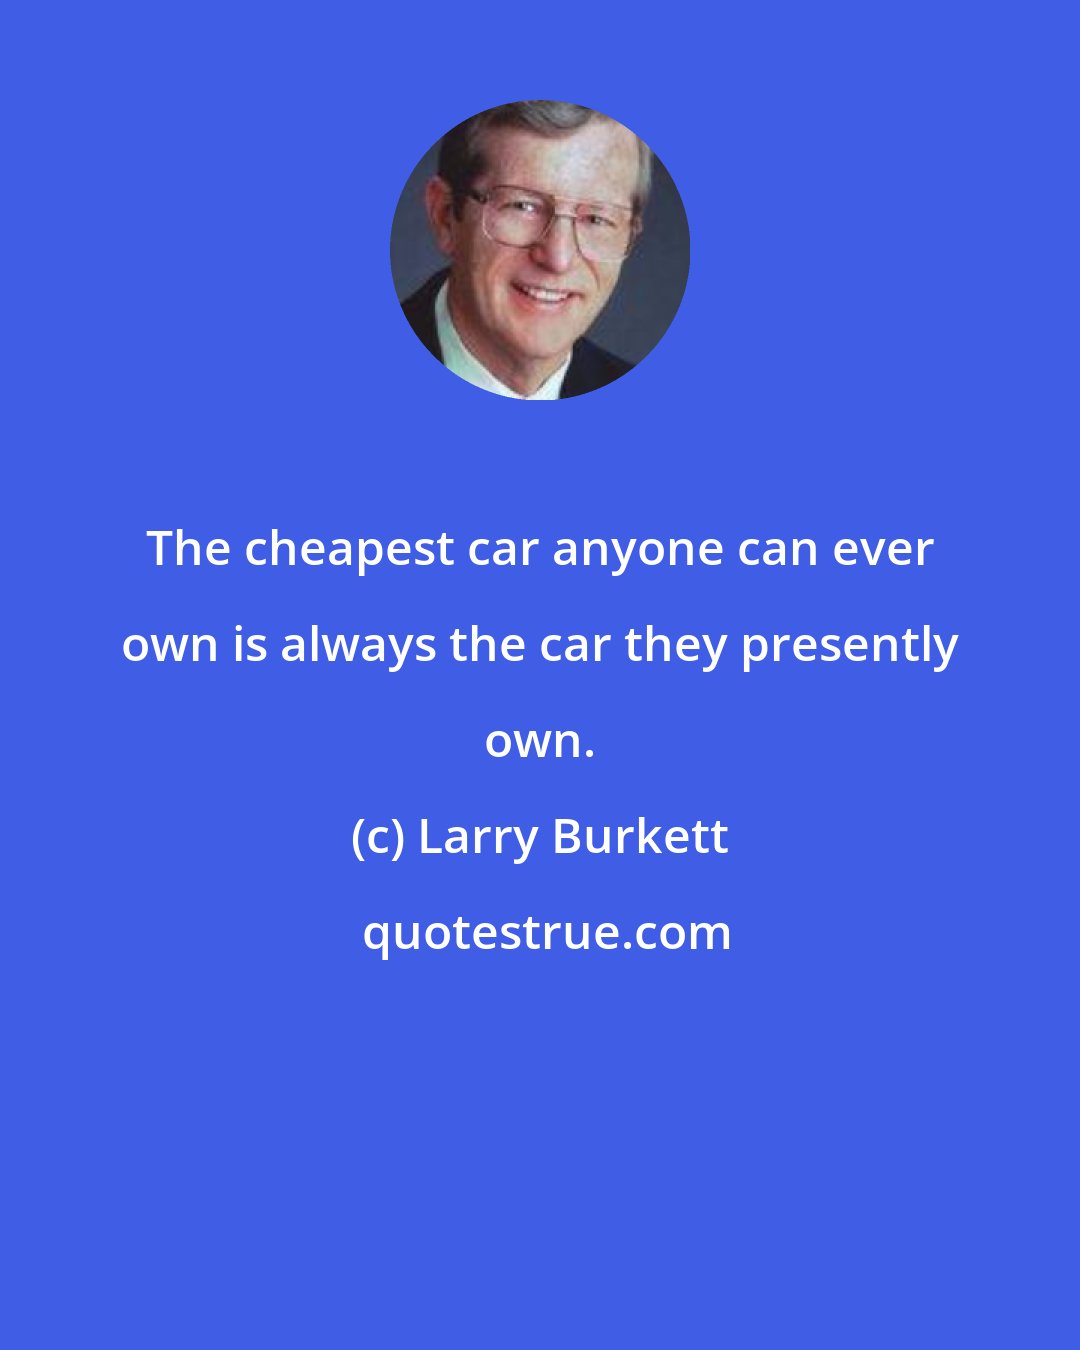 Larry Burkett: The cheapest car anyone can ever own is always the car they presently own.